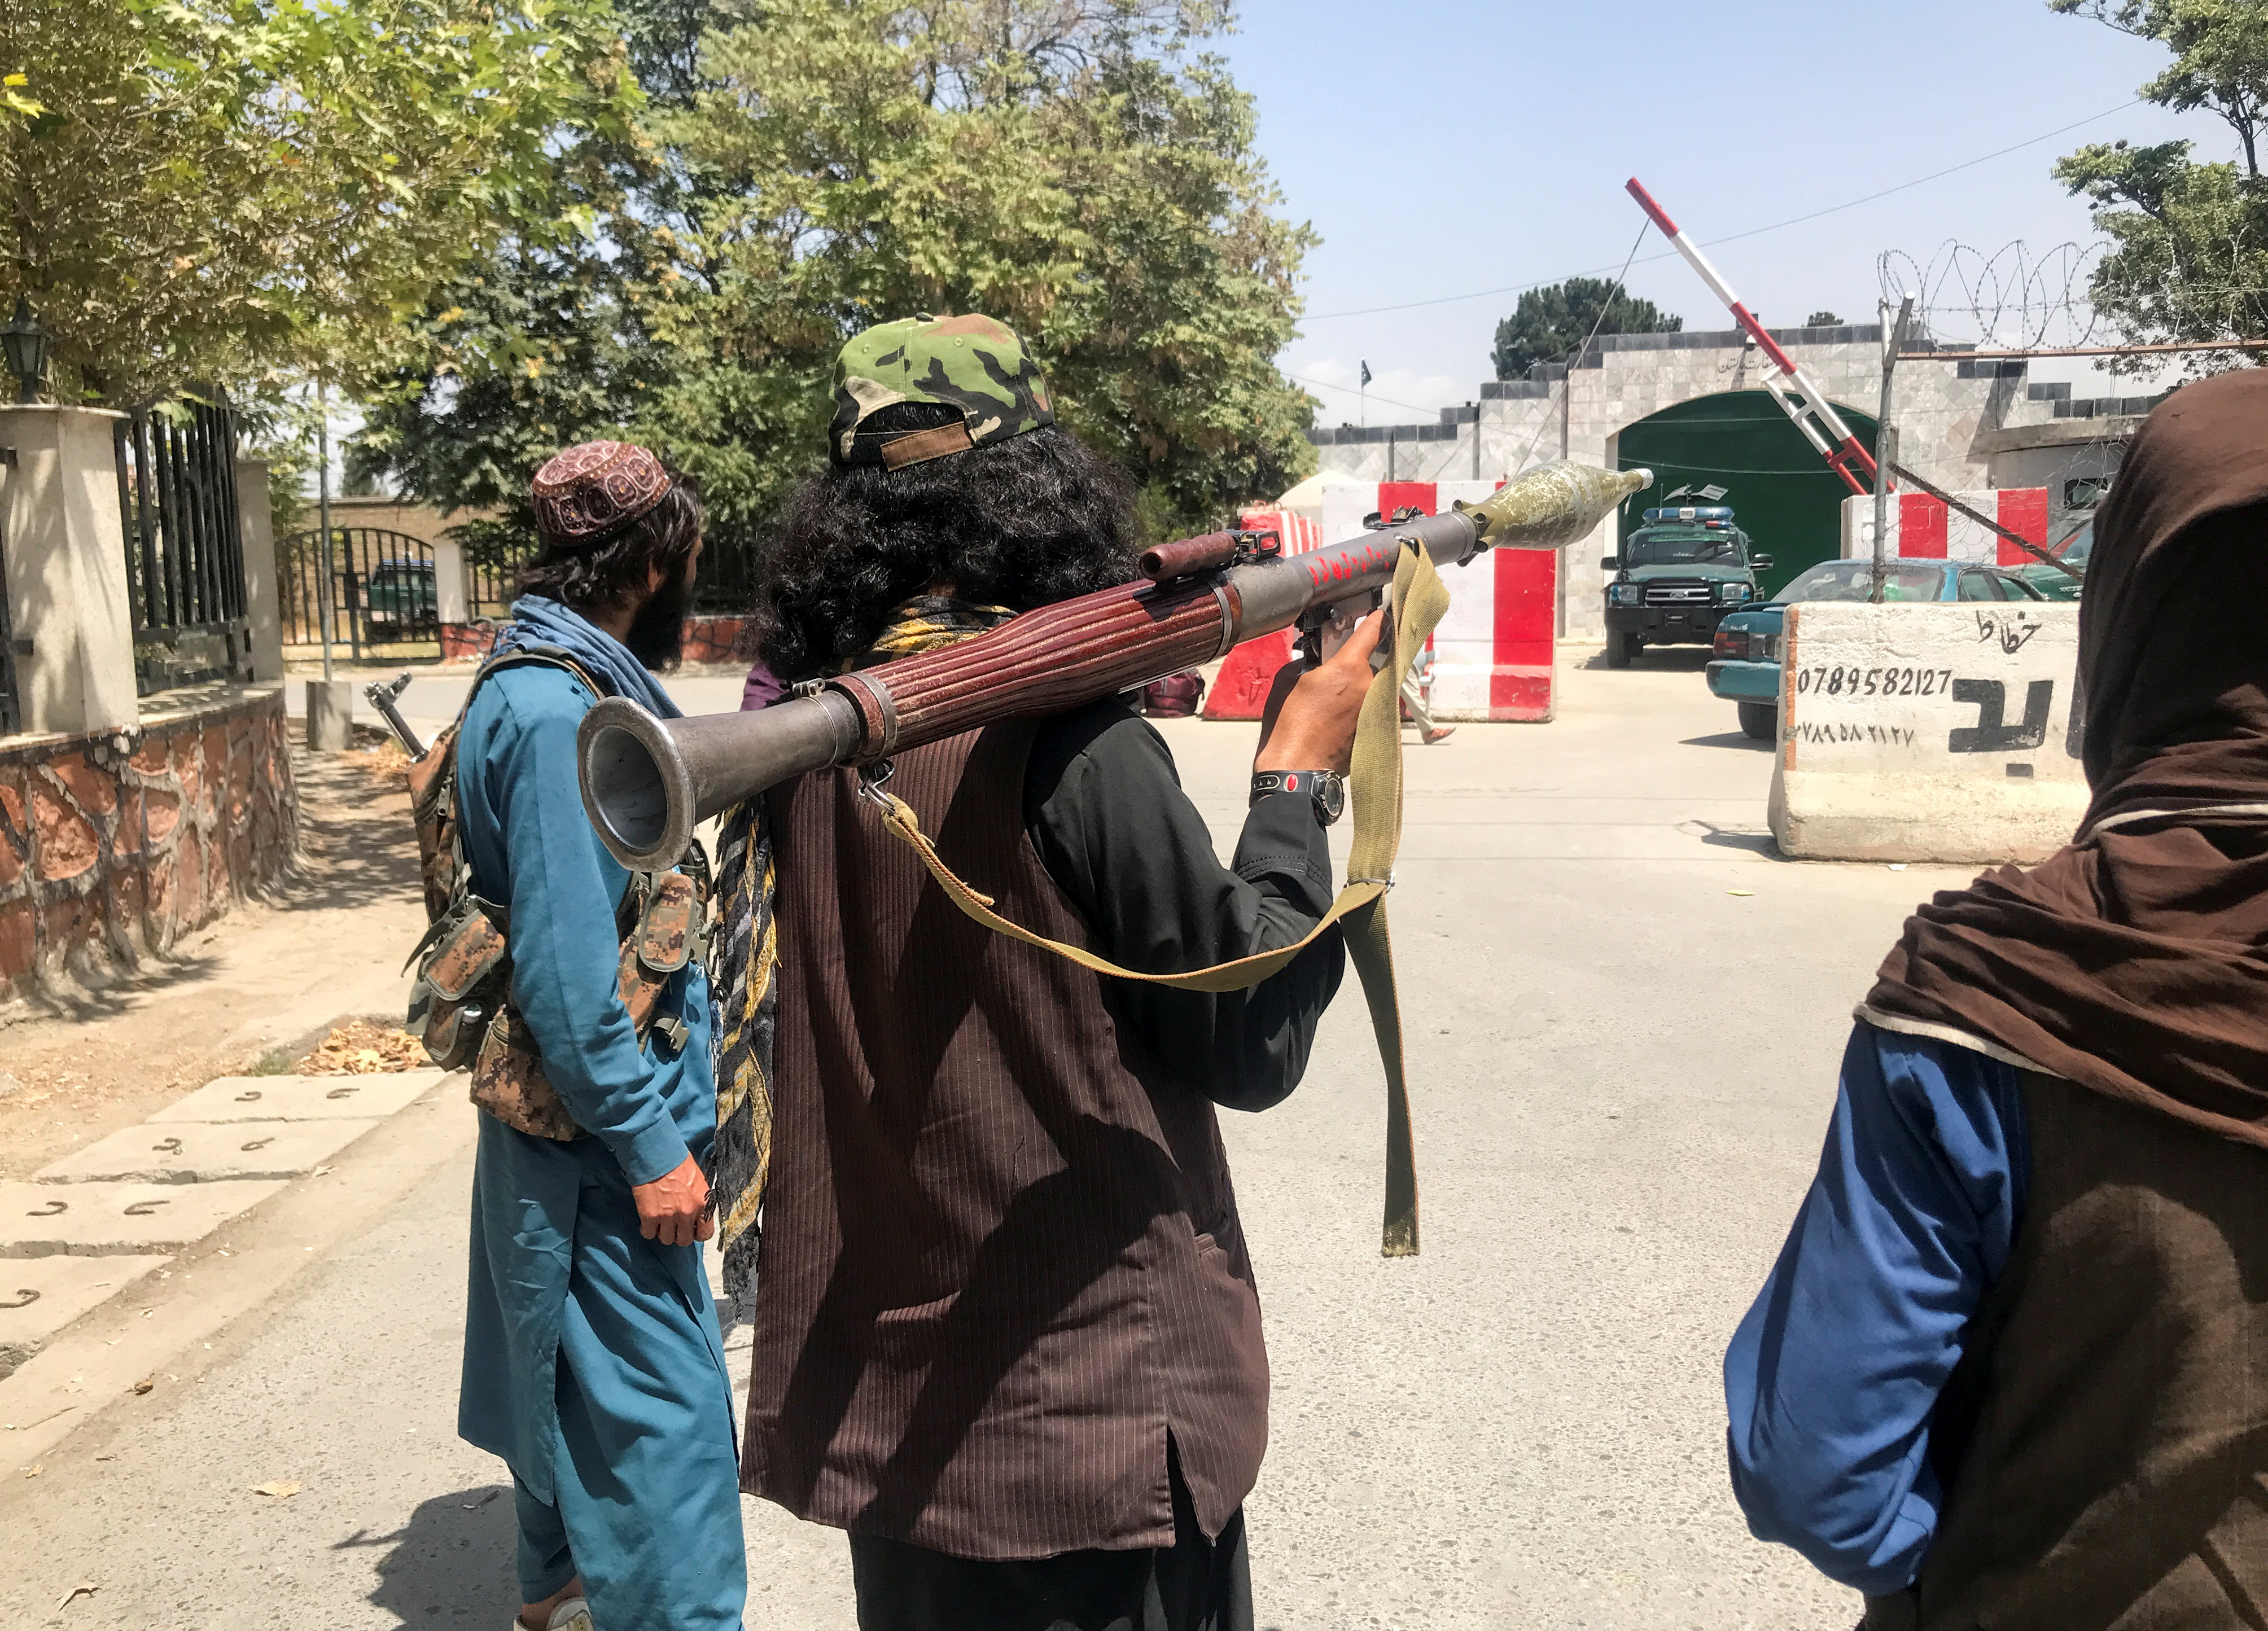 Taliban forces in Kabul